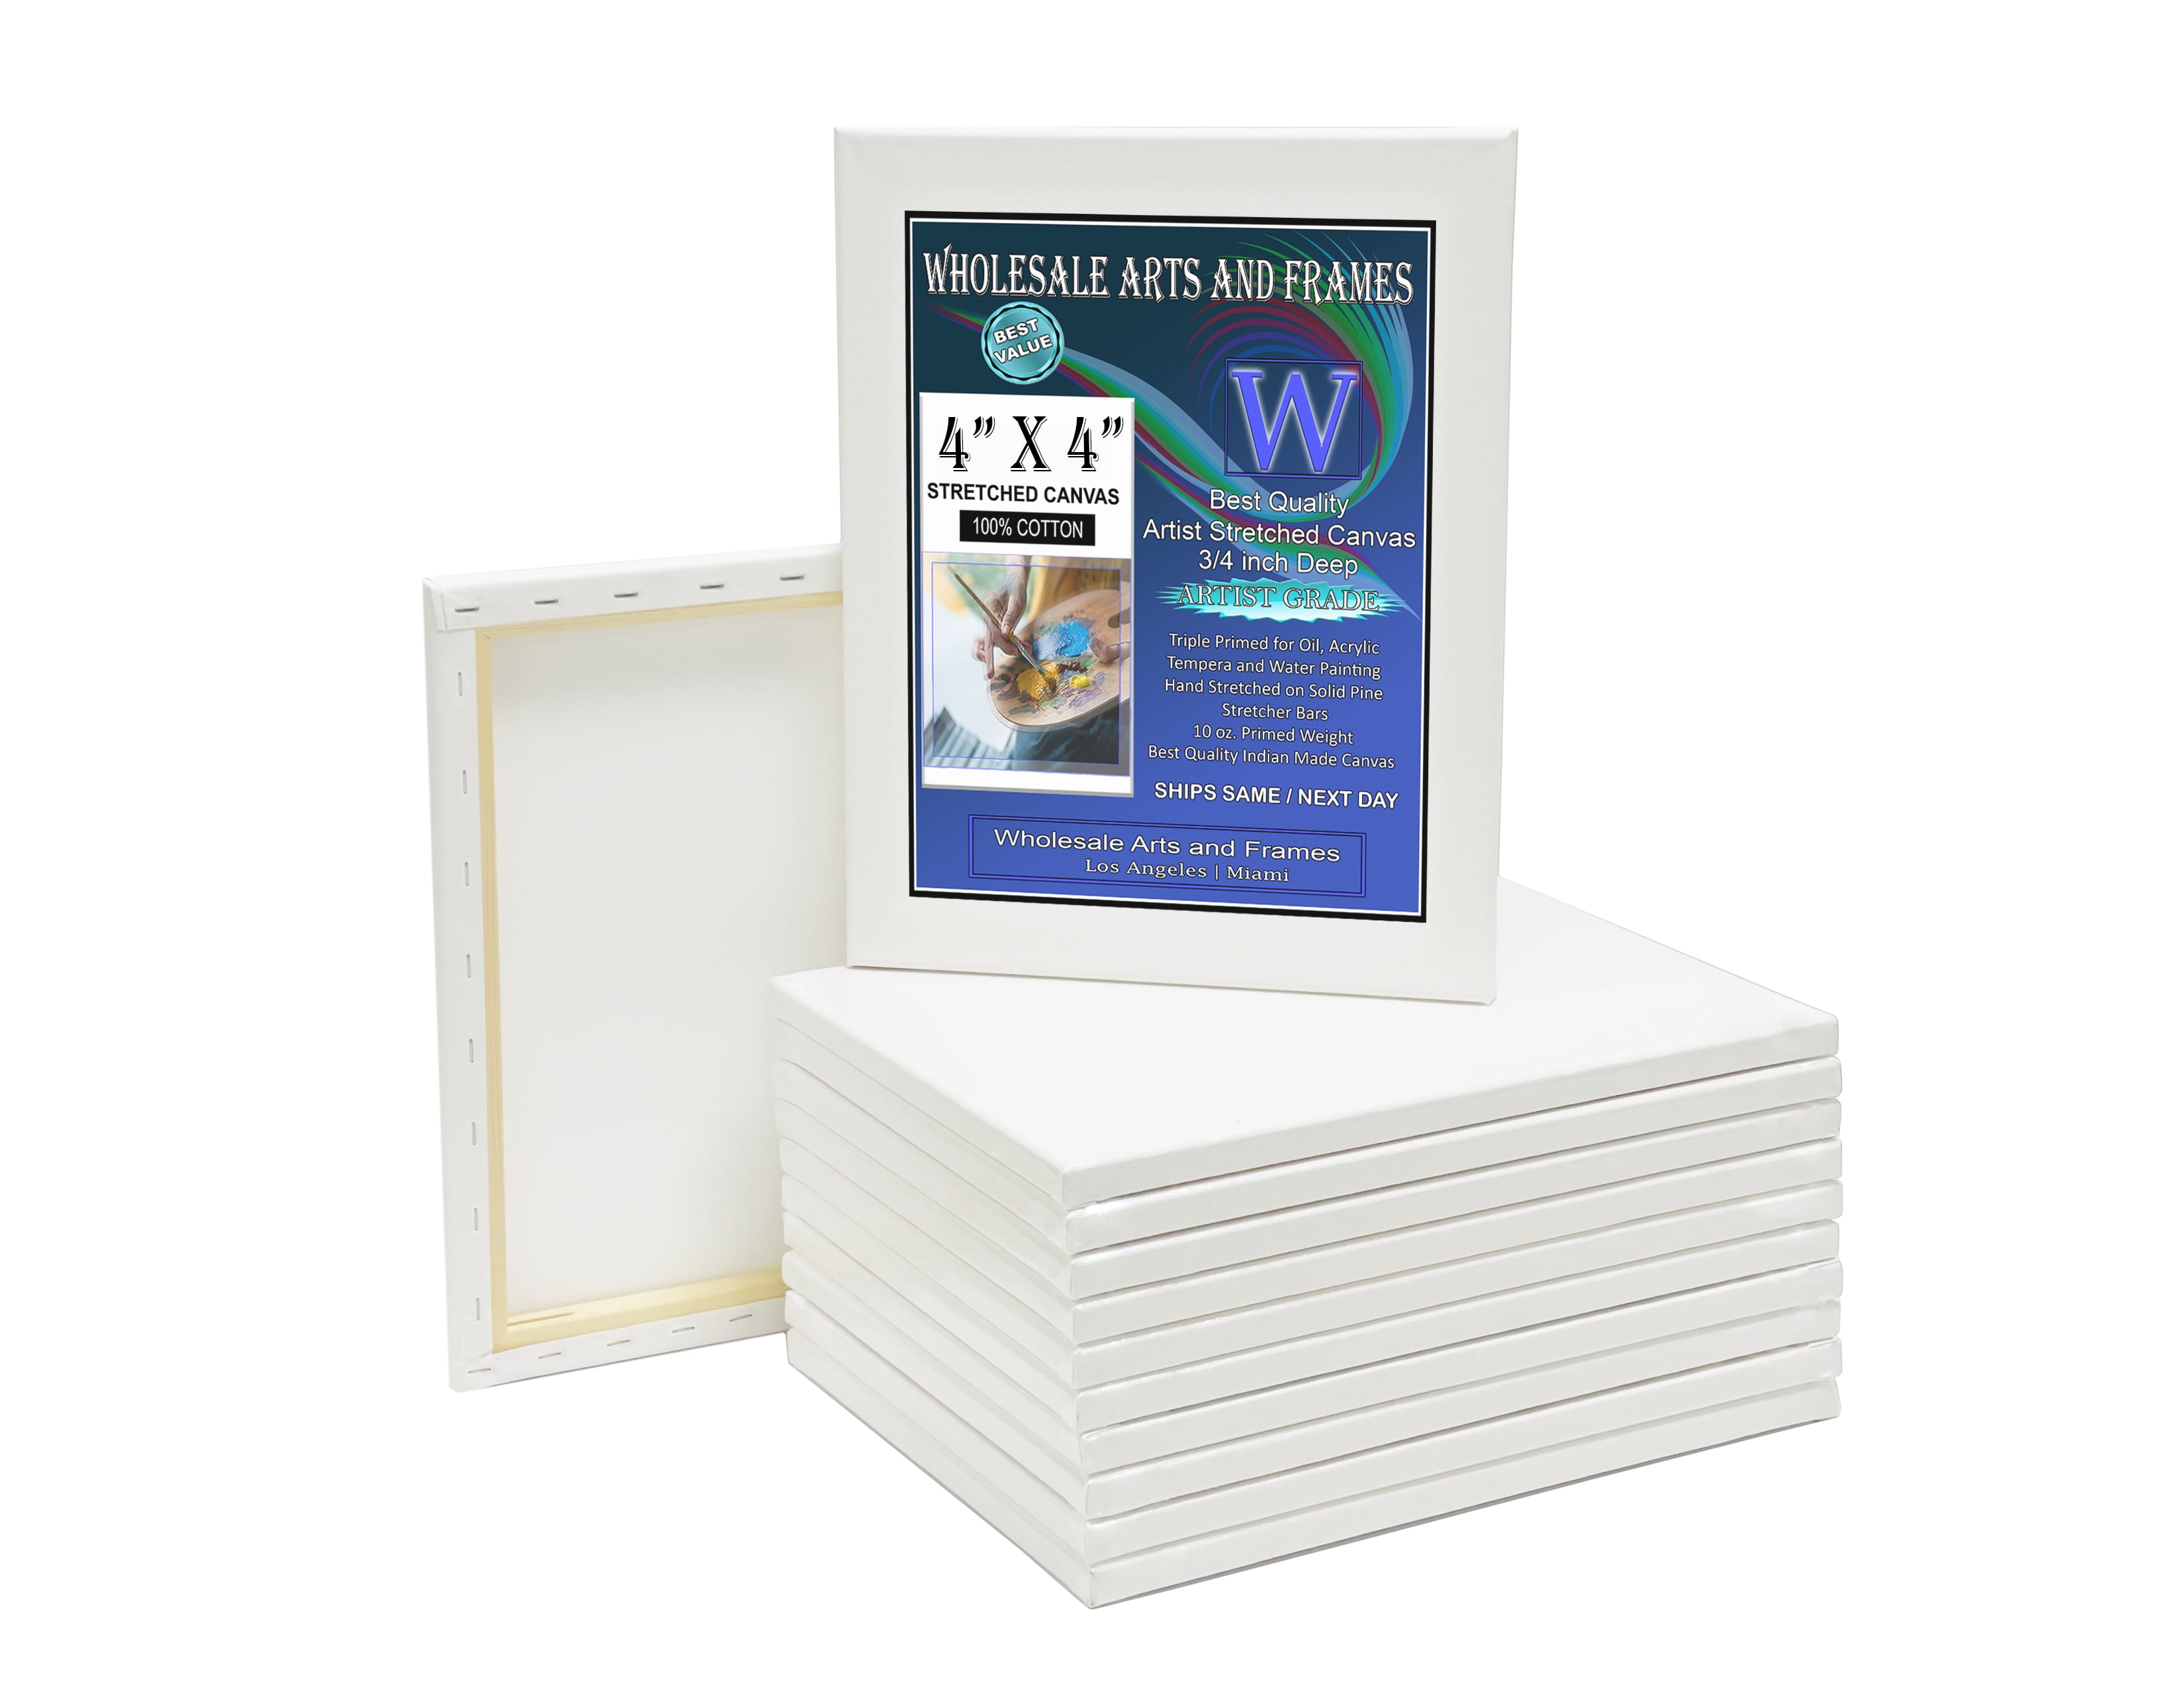 4 PACK CANVASES for Painting with 9x12 5x7 4x4 3x3 Painting Canvas for Oil  &  $19.21 - PicClick